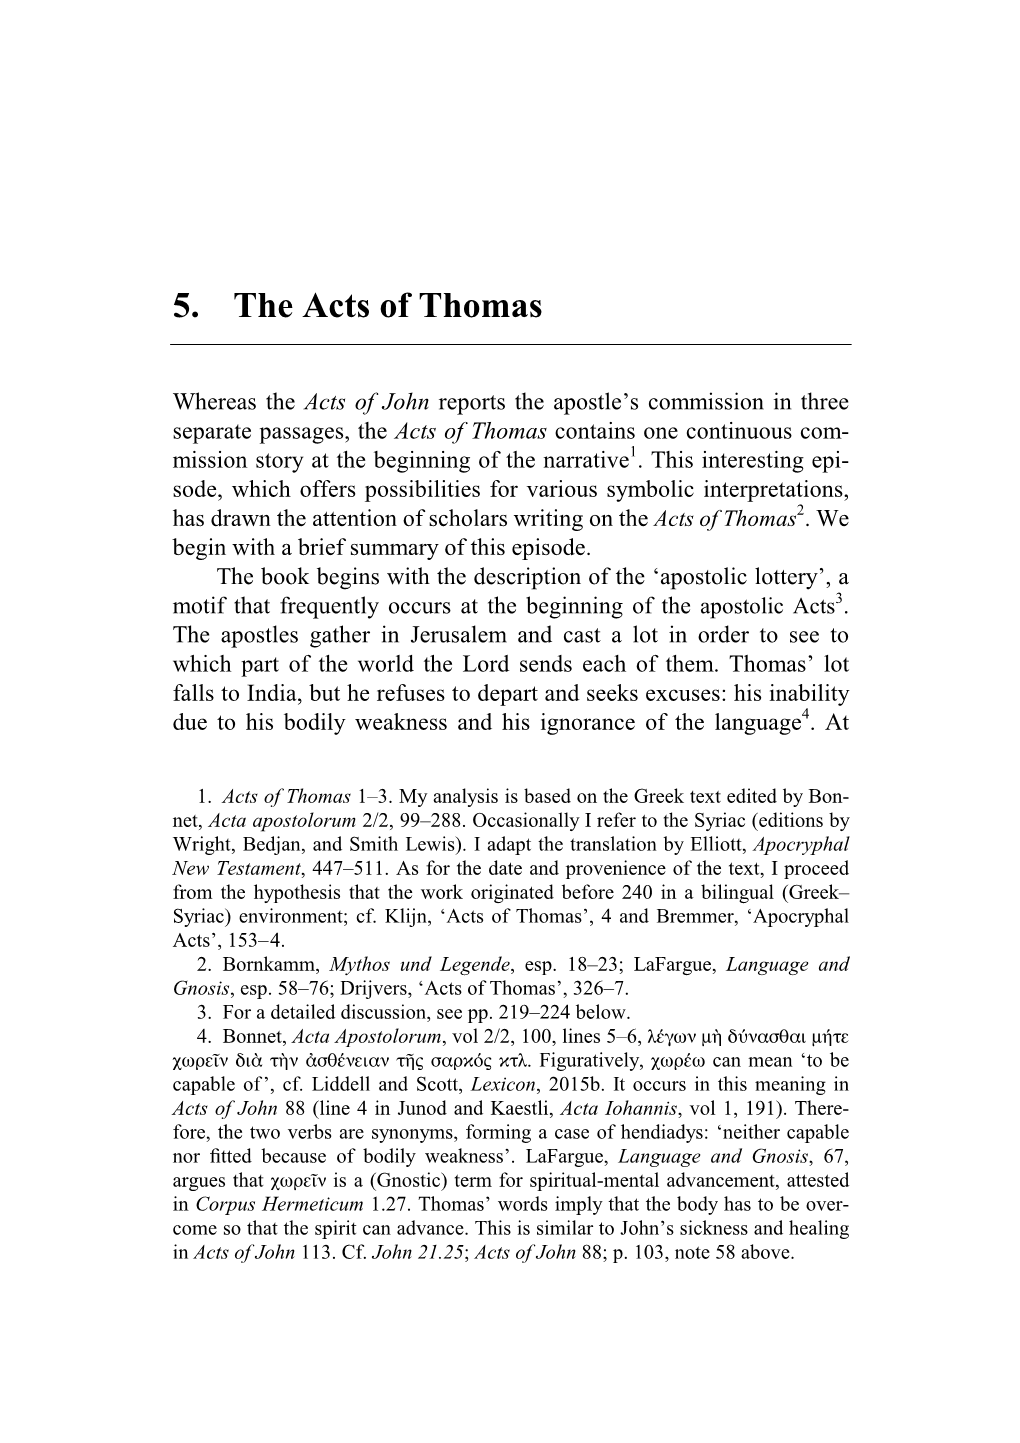 5. the Acts of Thomas